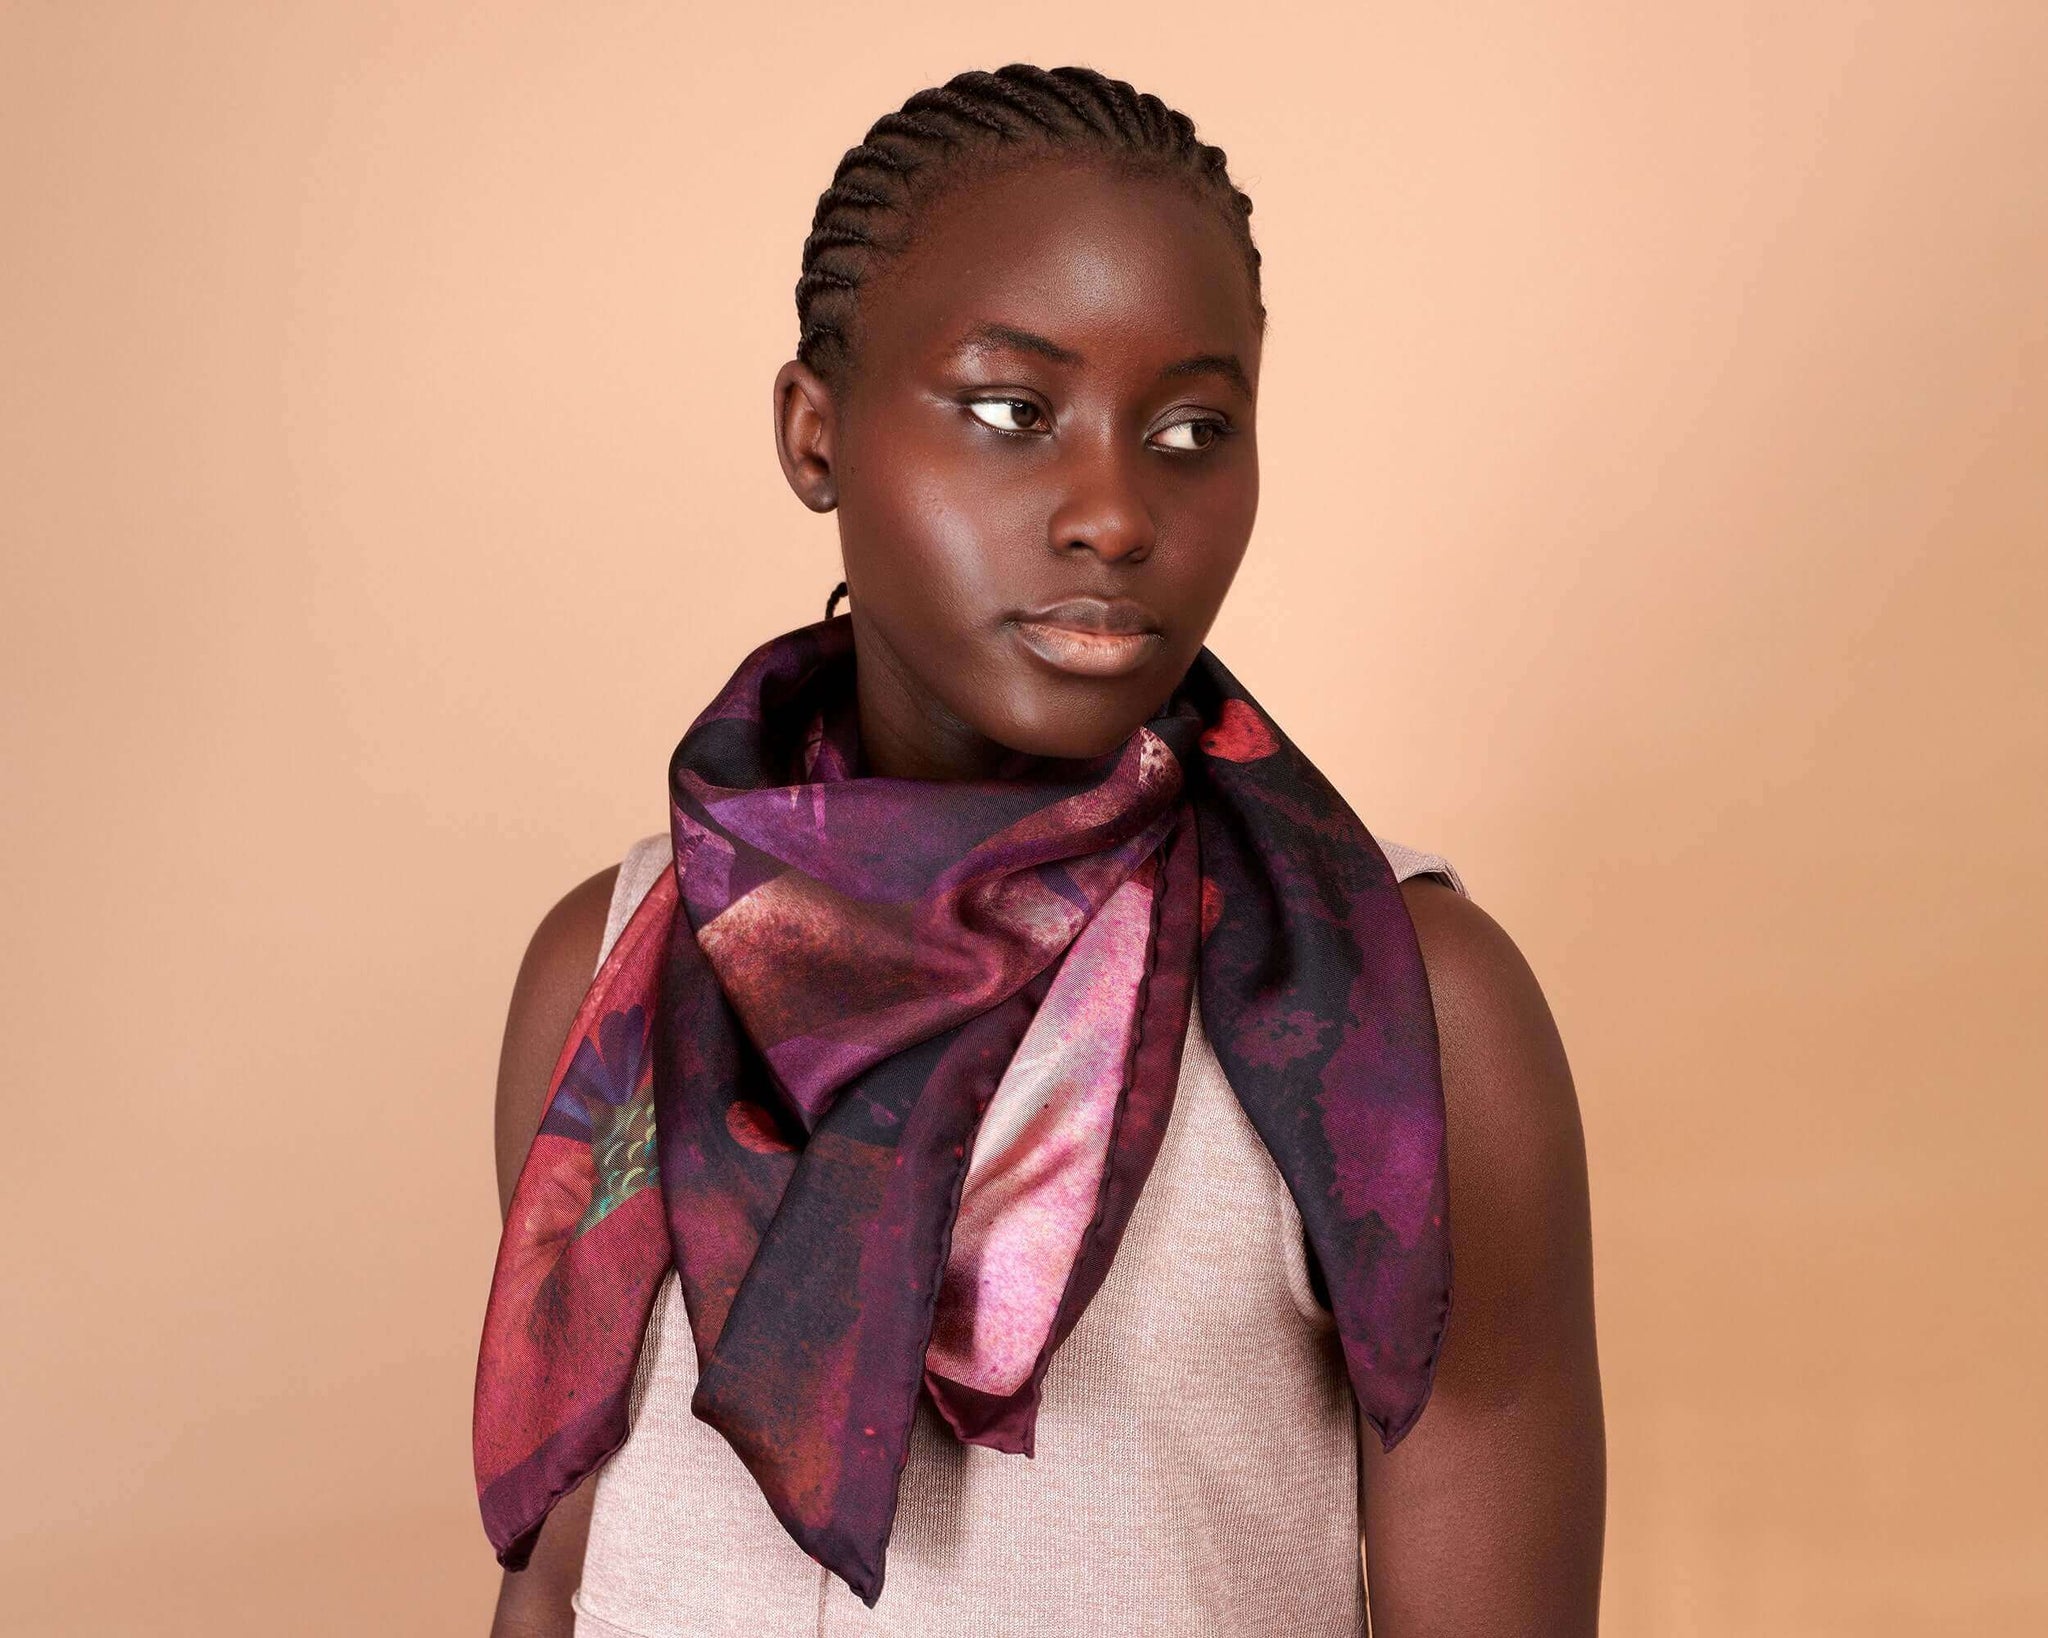 Silk Twill Scarf, Elephant and Calf Print, Bordeaux and Plum Hues, Original Design, Made In Italy